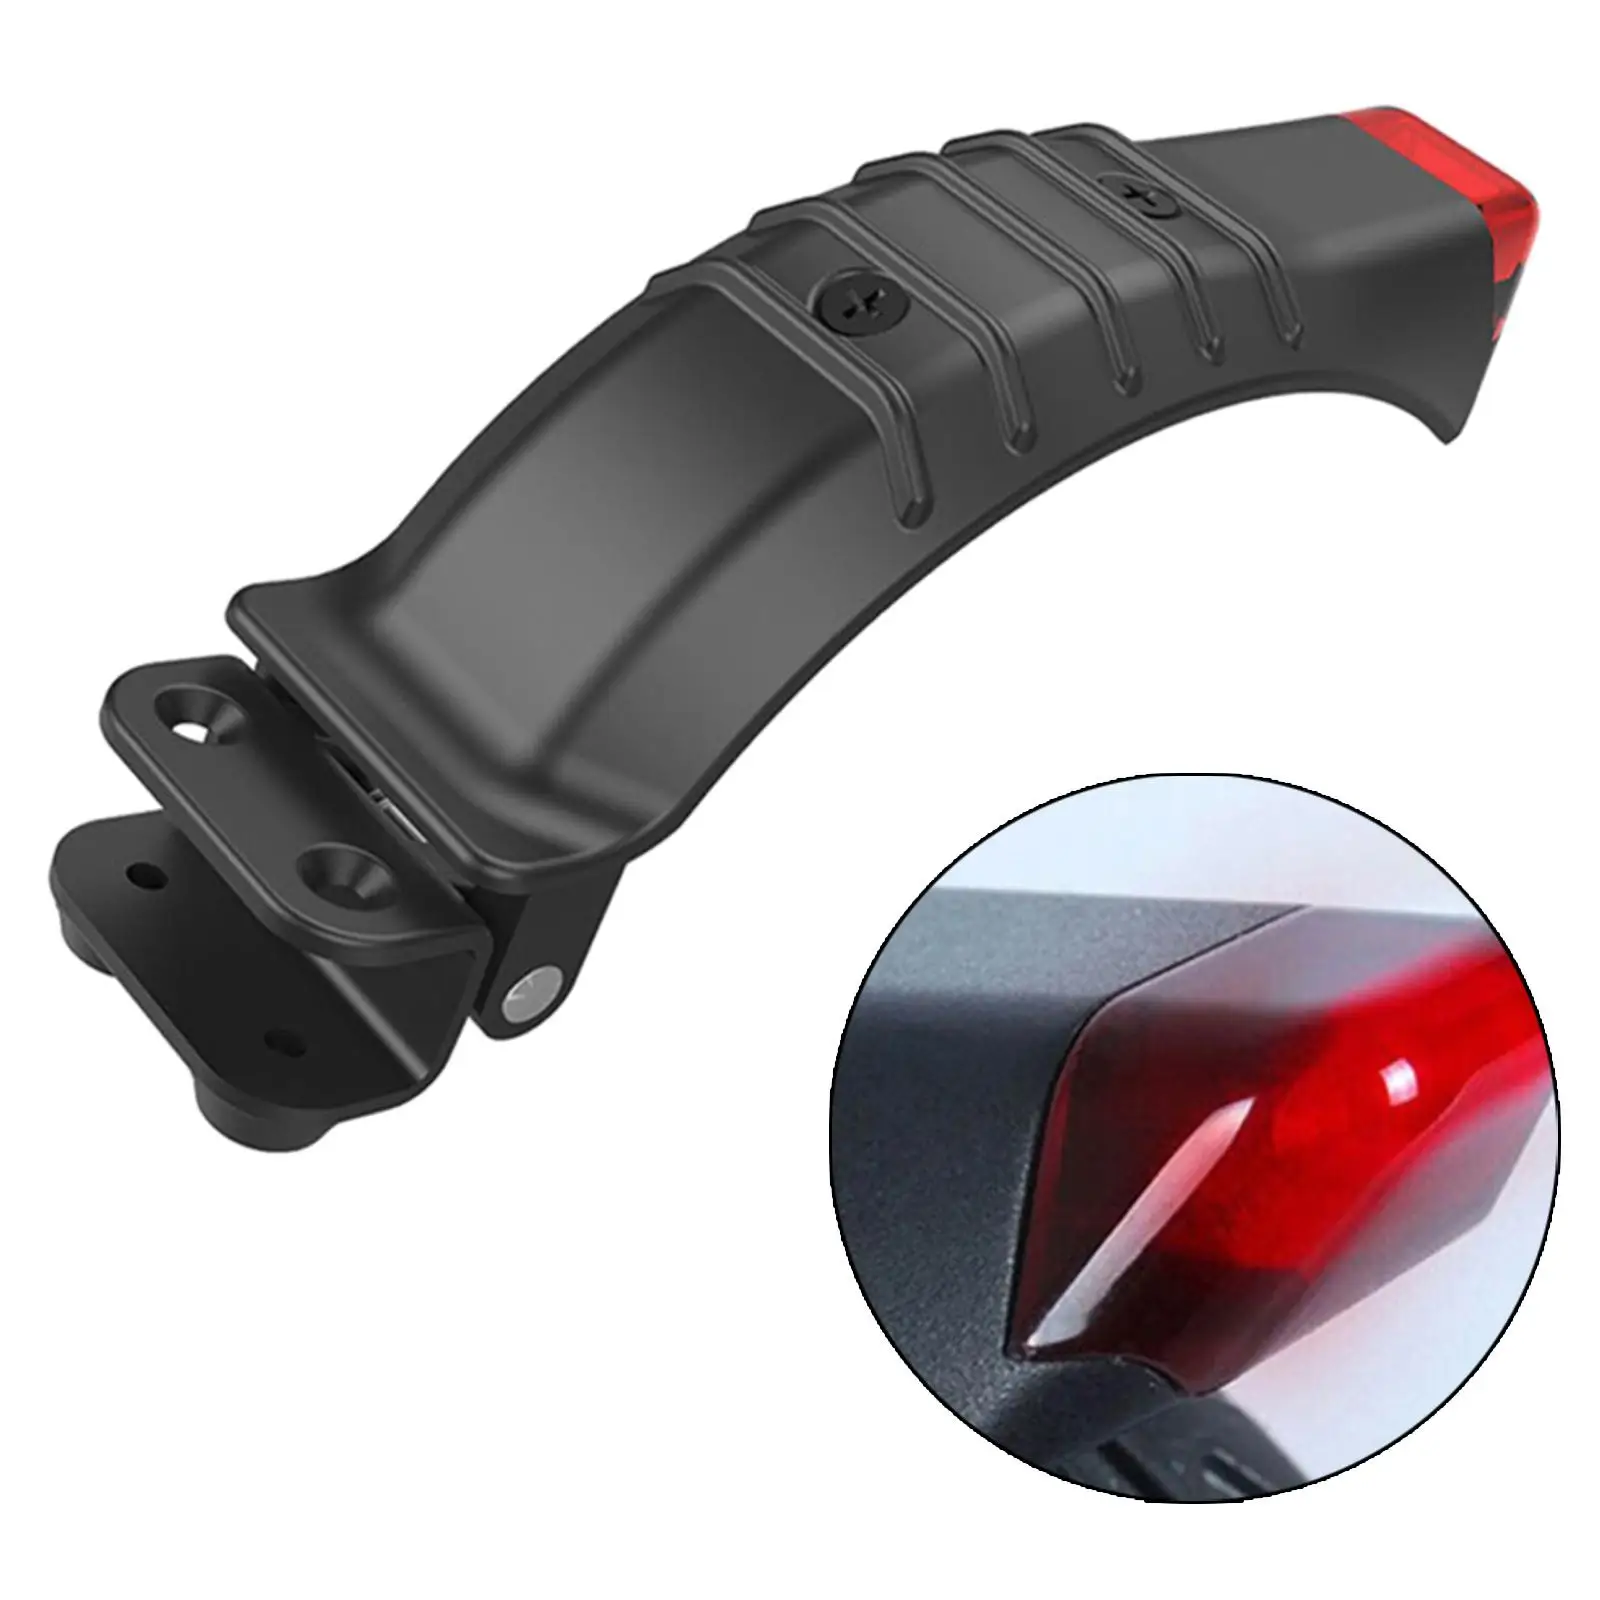 Mudguard Scooter Accessories 5/5.5/6.5 inch Replacement Part